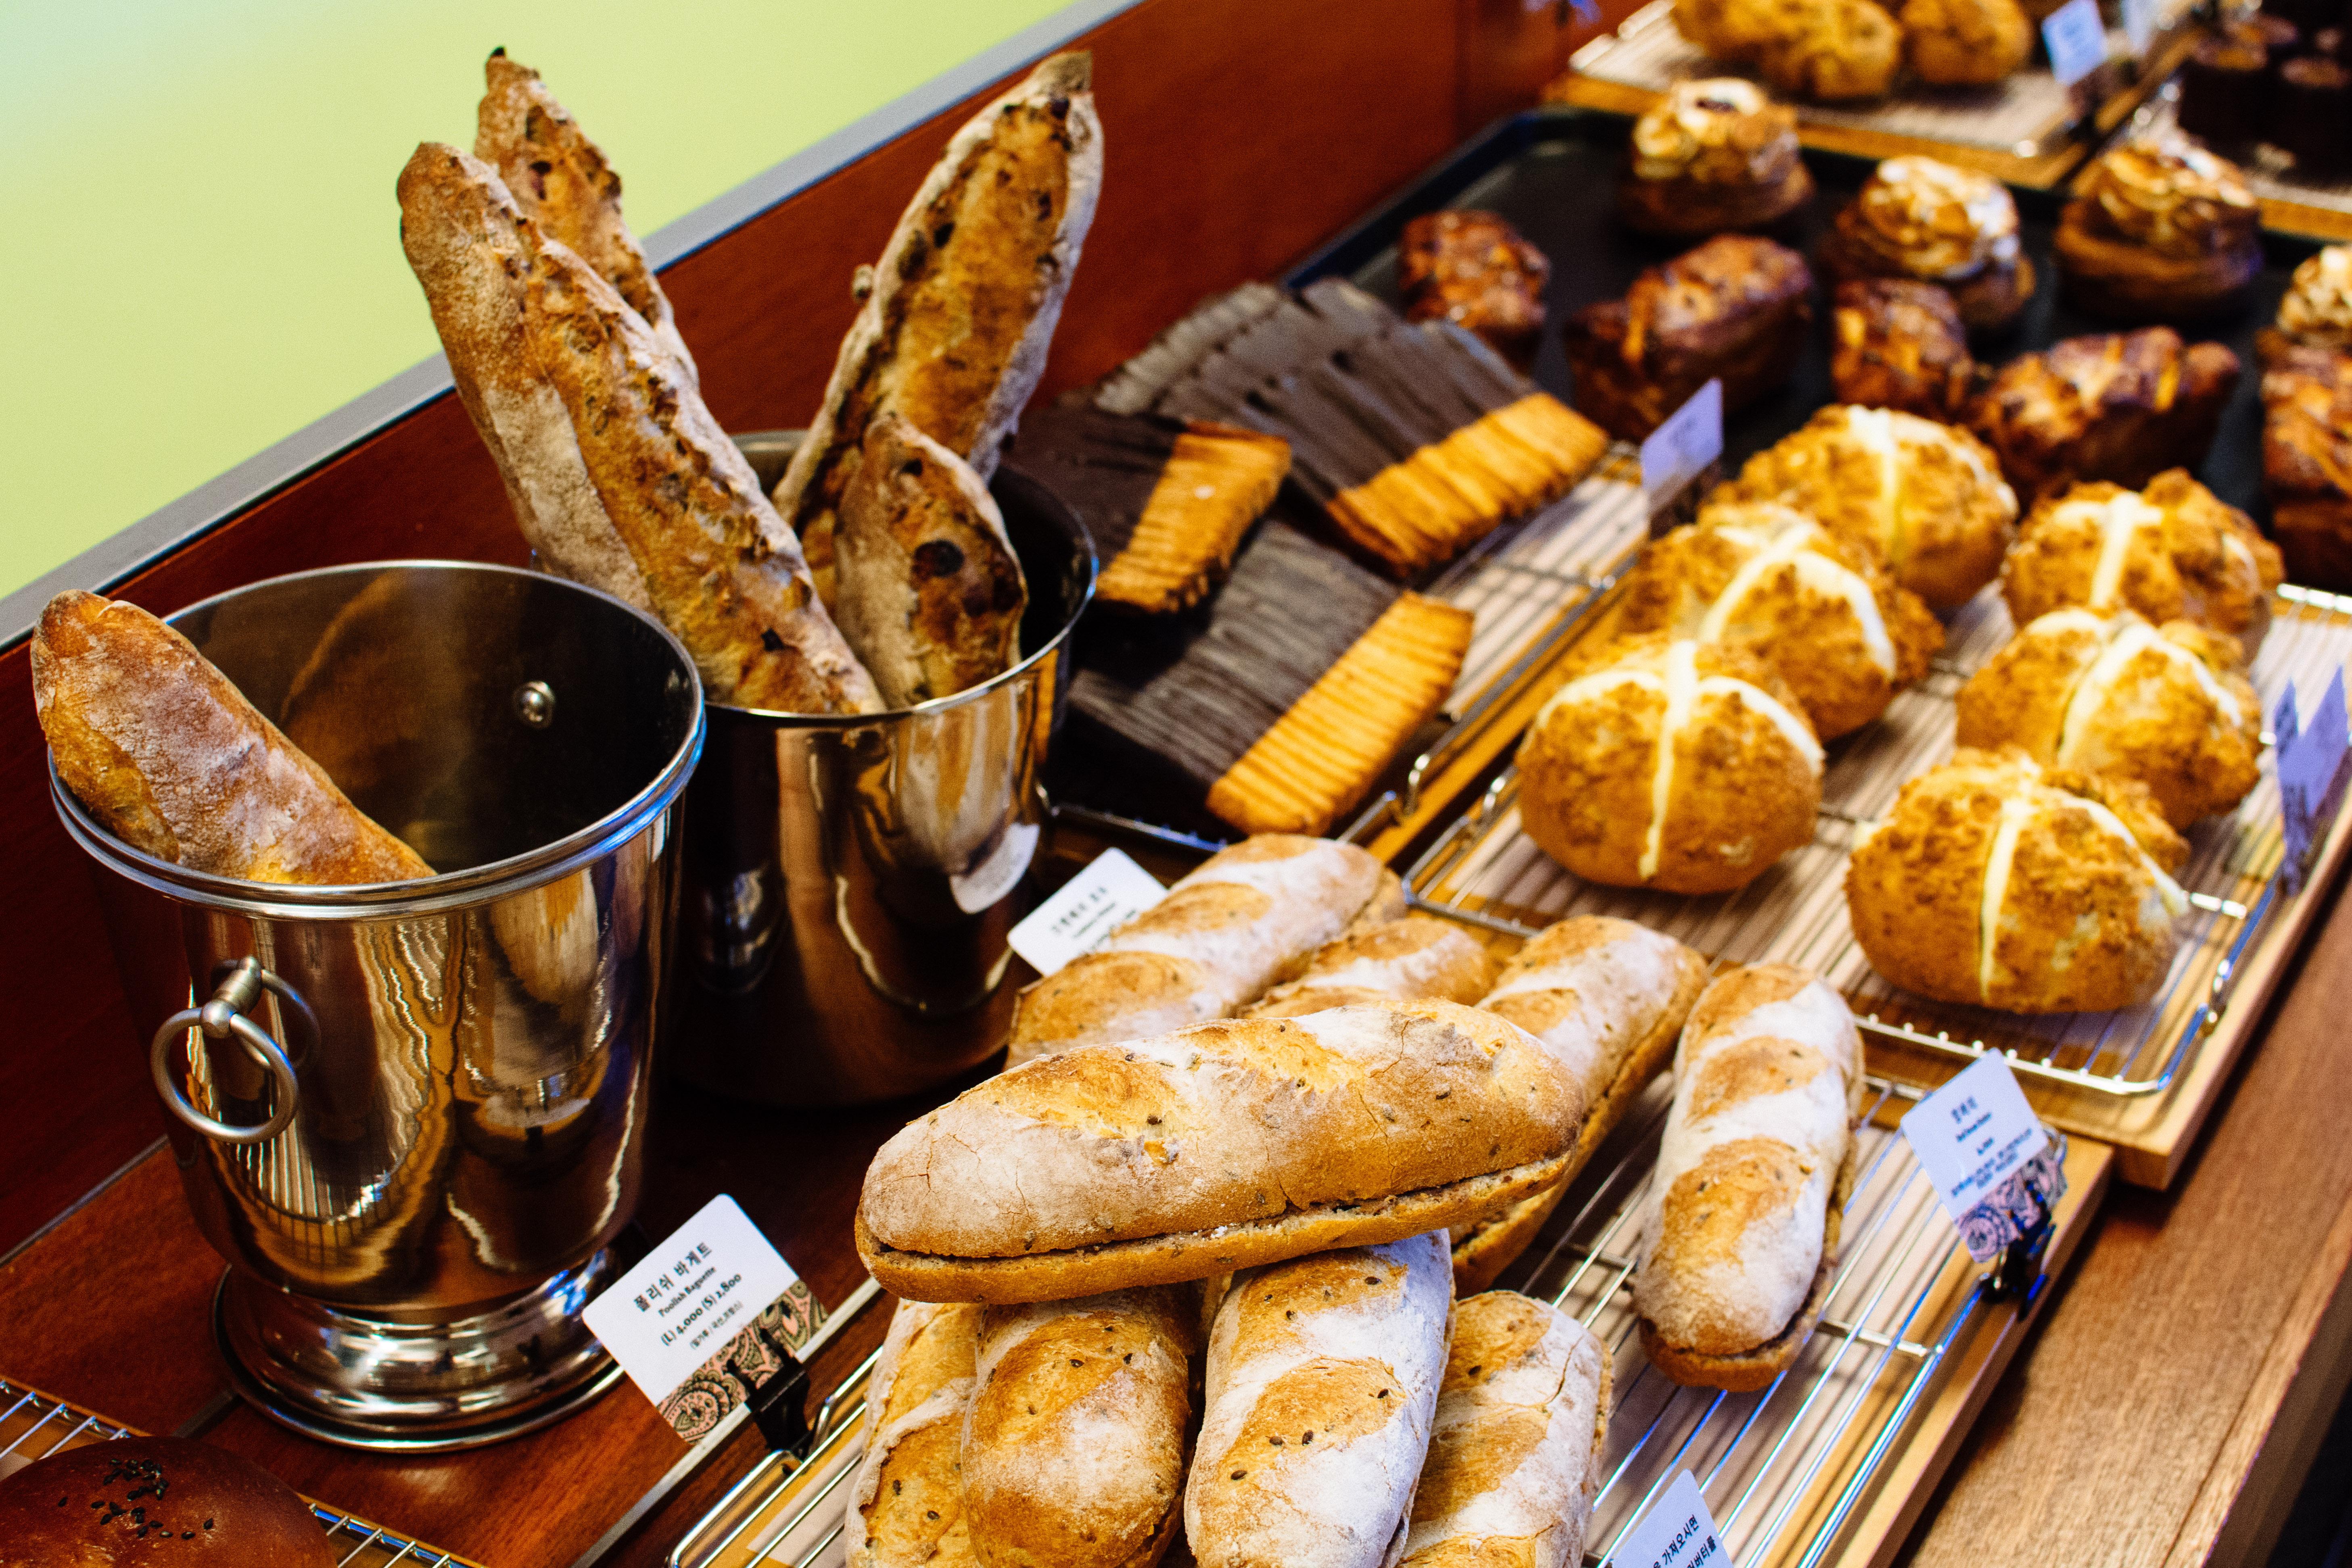 Picture Perfect Pastries: Our Bakery